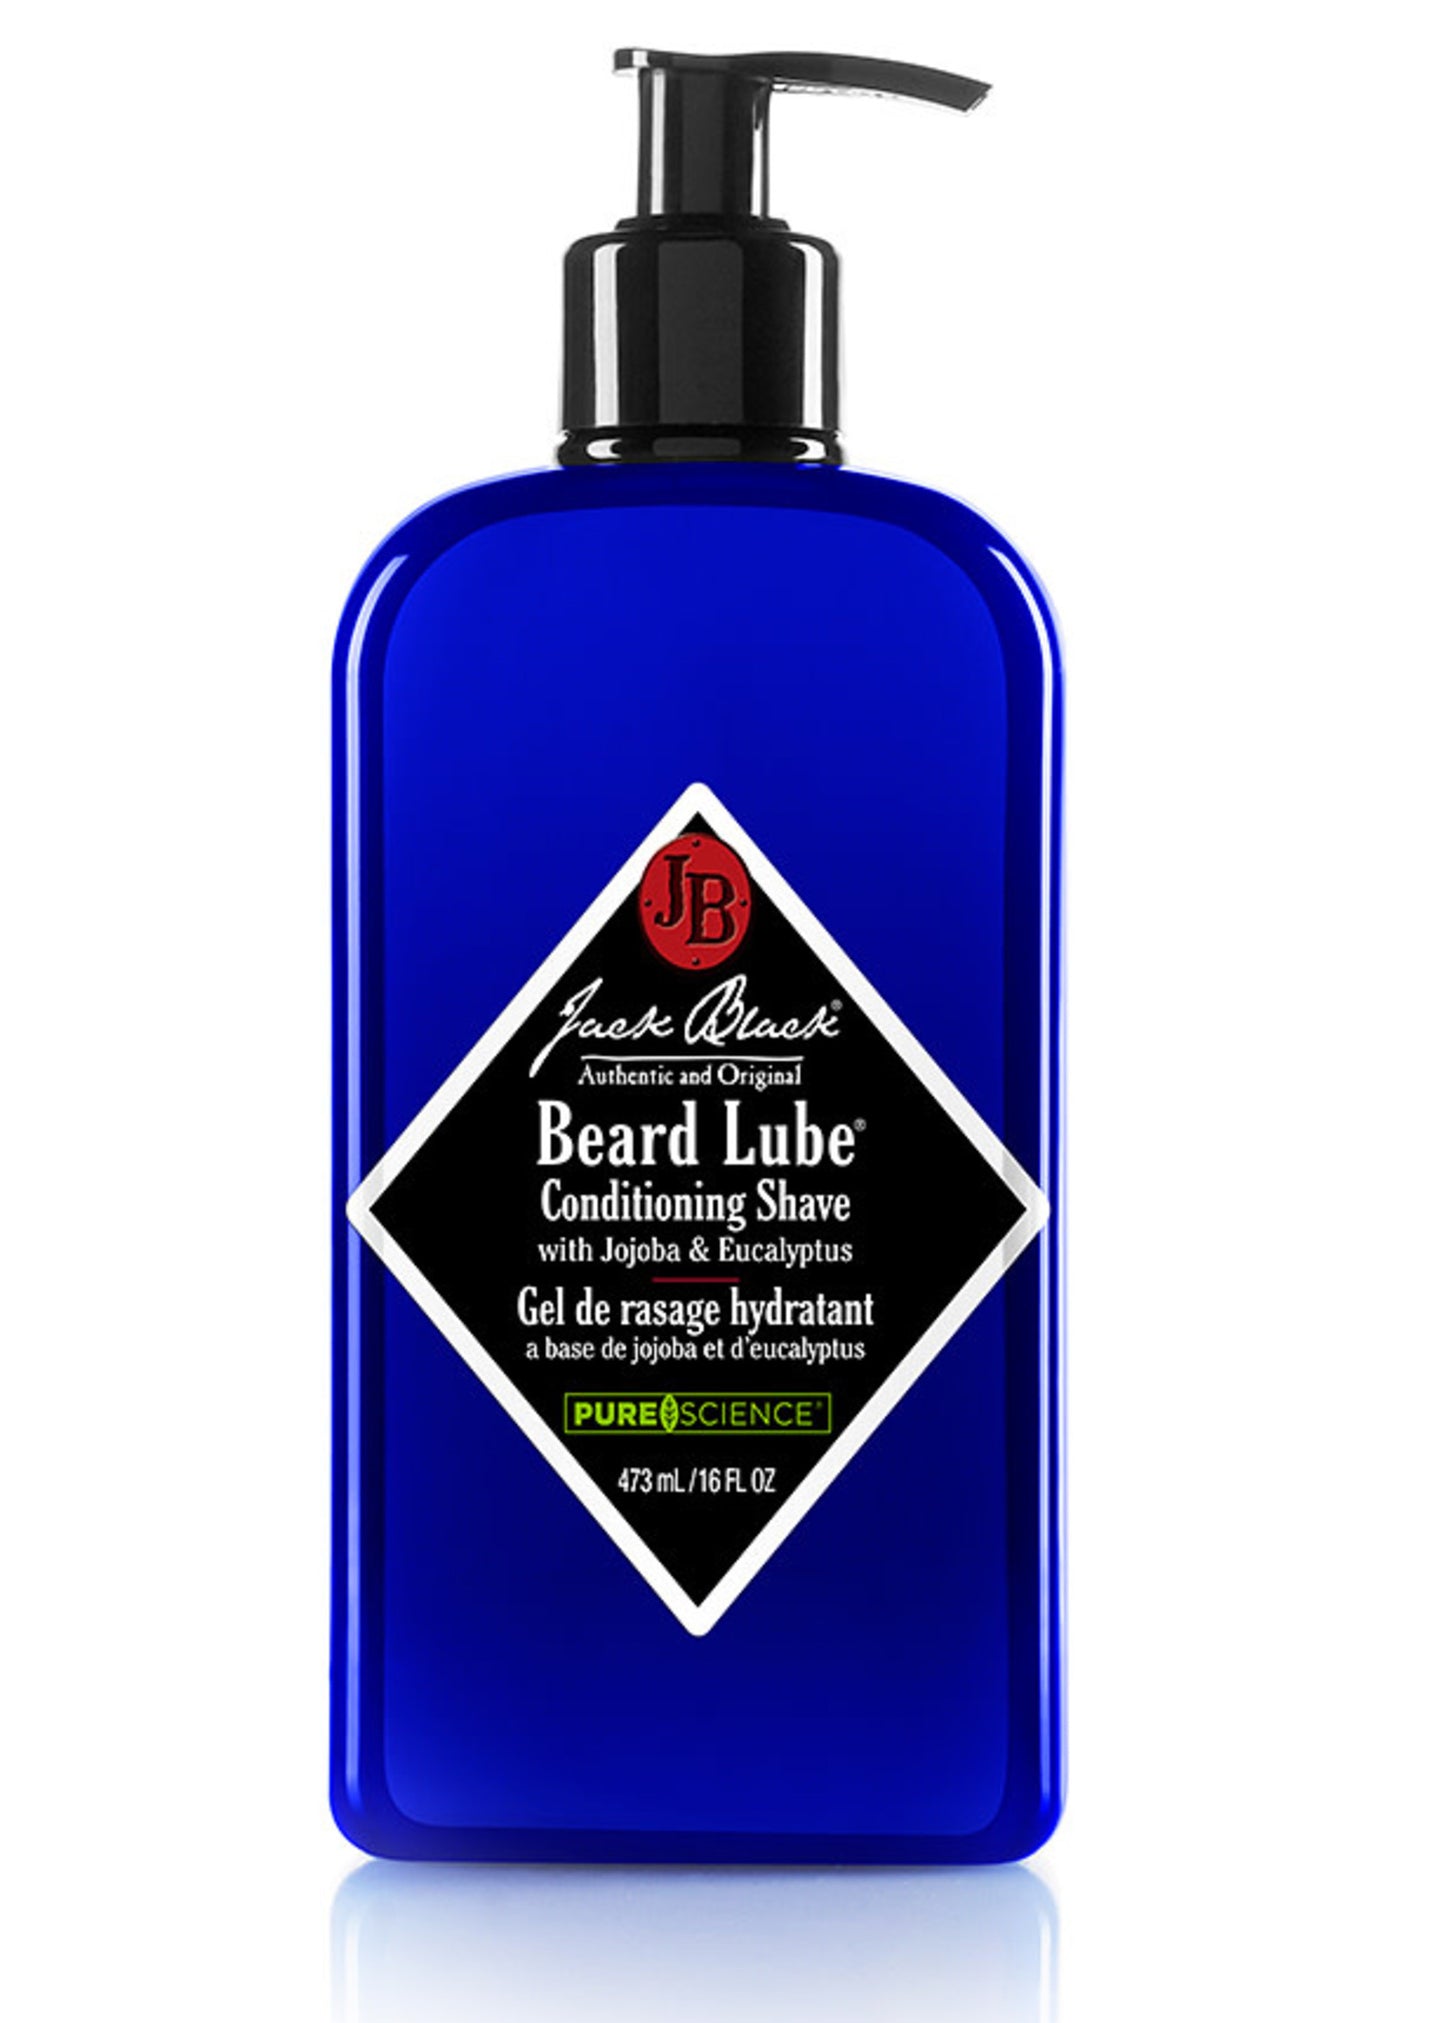 Beard Lube Conditioning Shave 16oz